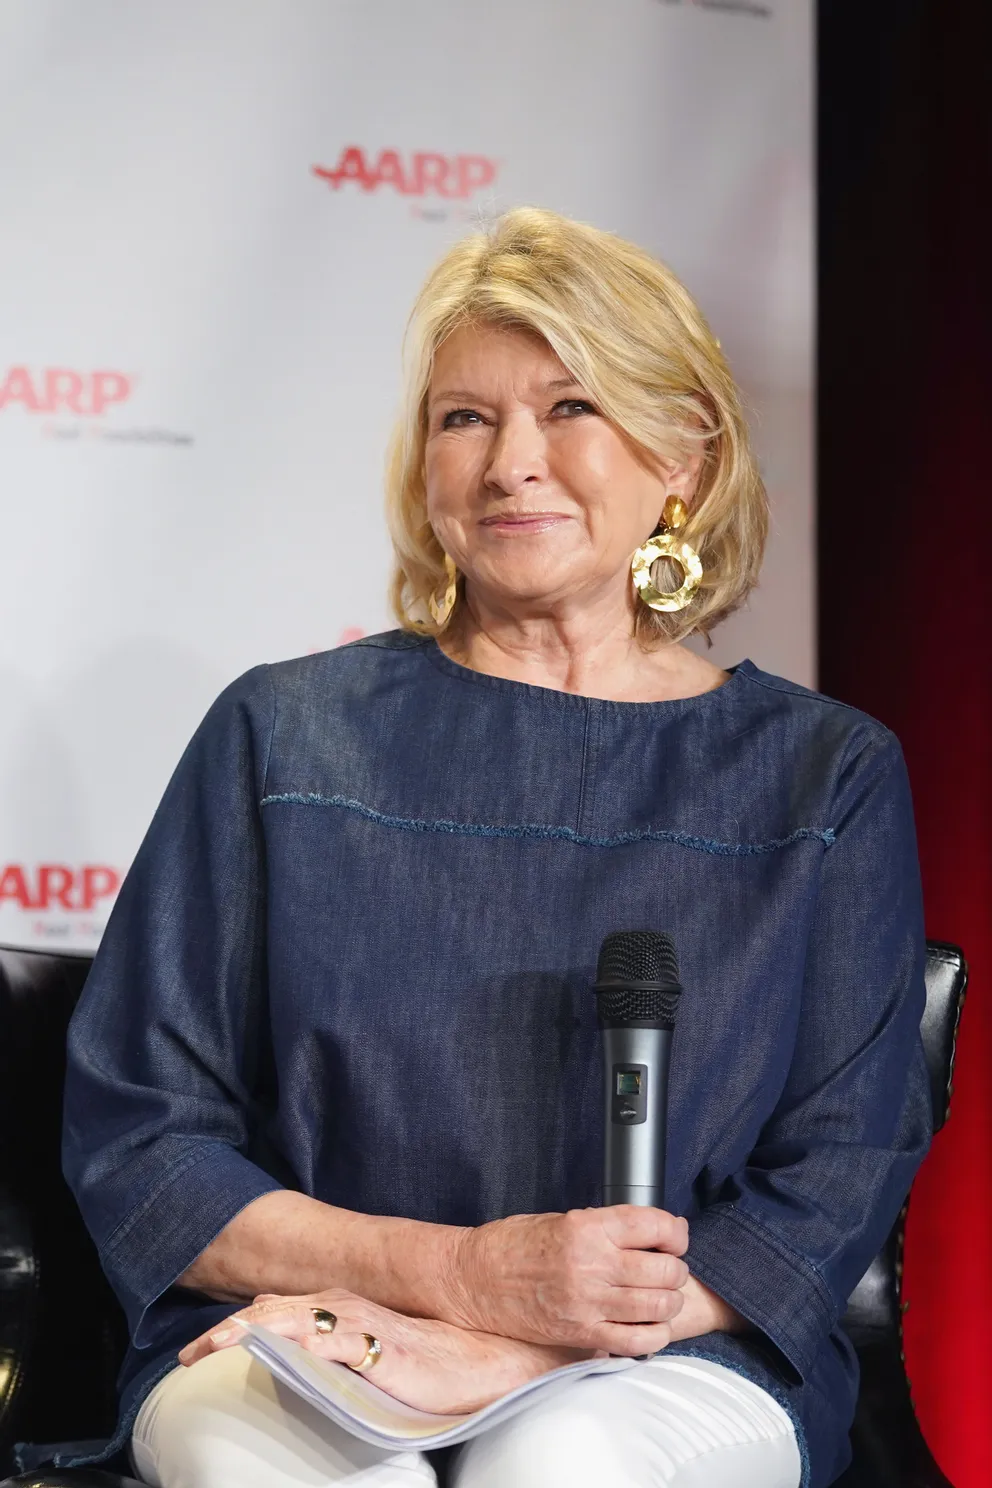 Martha Stewart speaks onstage at Fully Baked: Martha Stewart during the SXSW Conference and Festivals on March 11, 2019, in Austin, Texas | Photo: Amy E. Price/Getty Images